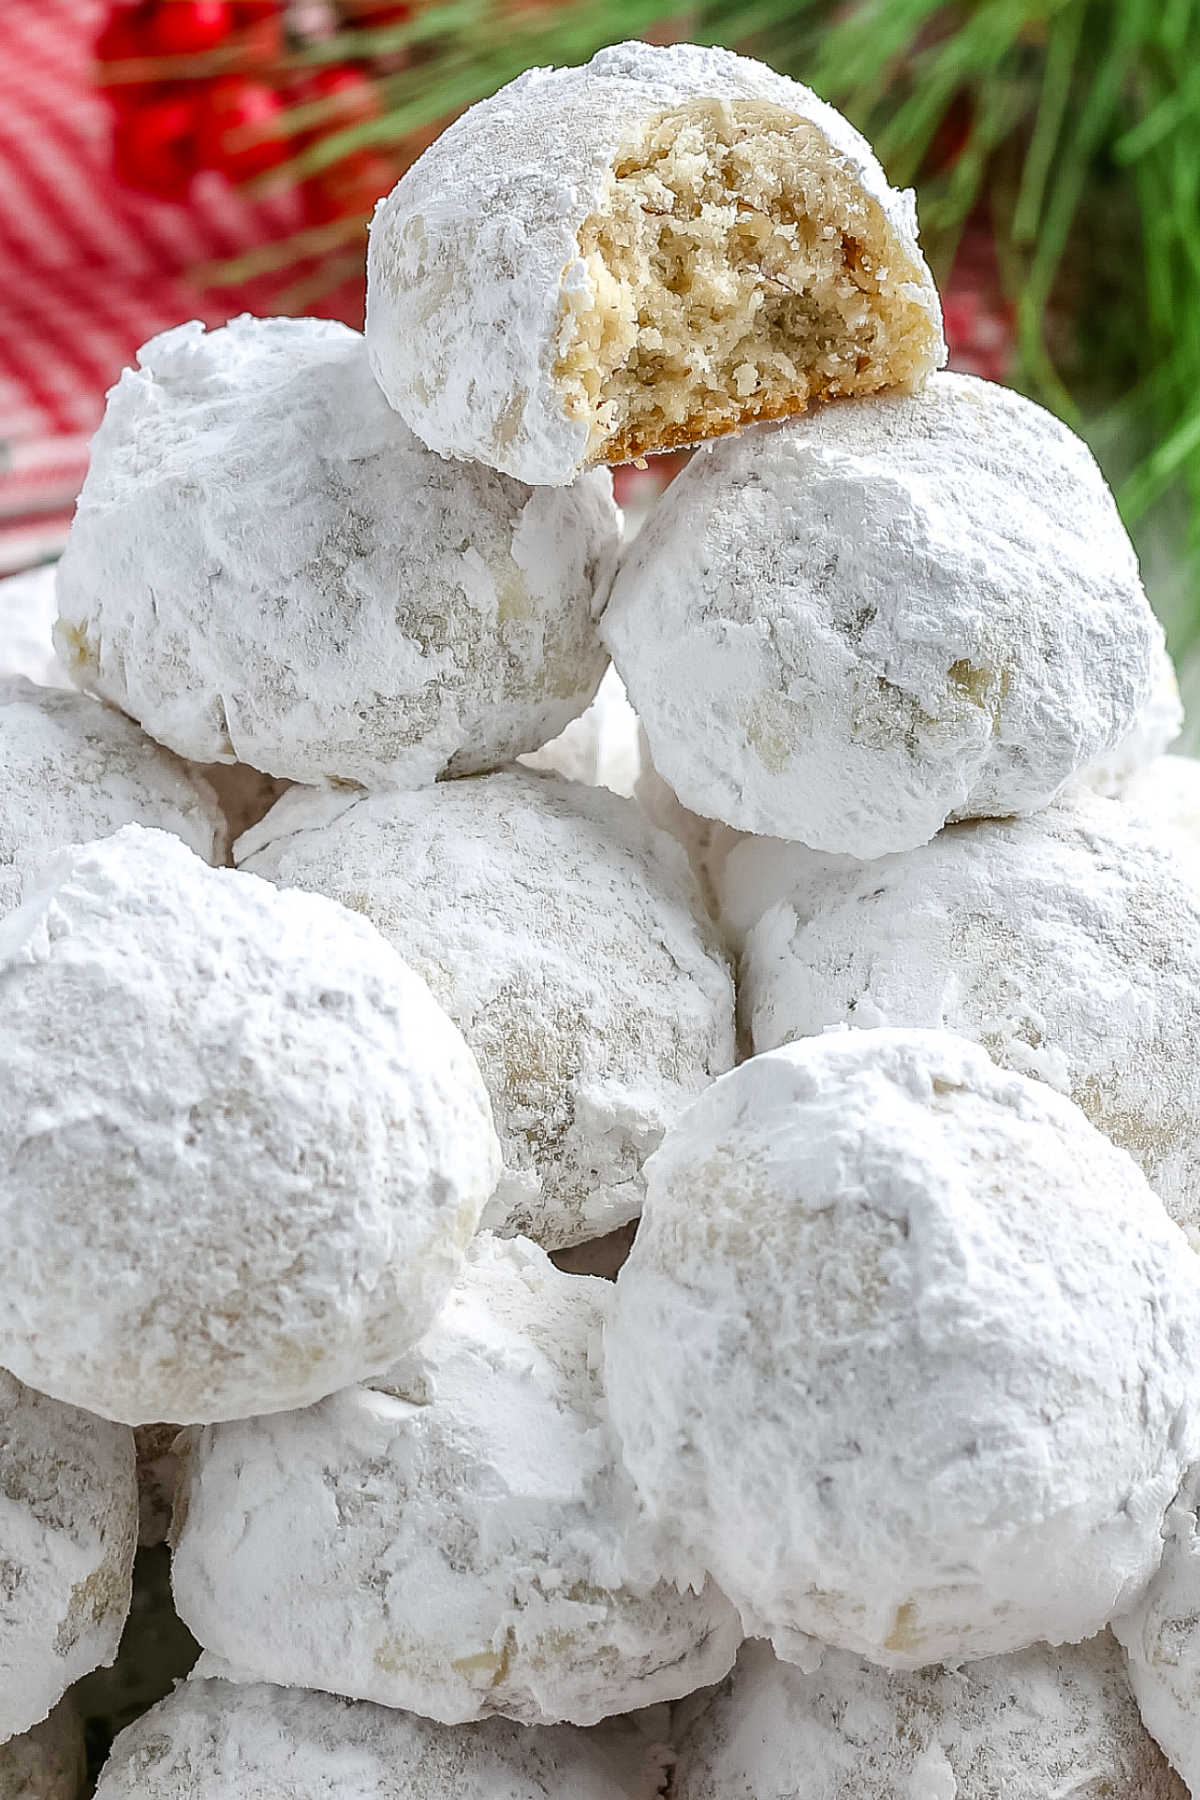 Pecan Snowball Cookies are soft, tender cookies that melt in your mouth. Kids love rolling the cookies in snowy white powdered sugar.  via @foodfolksandfun